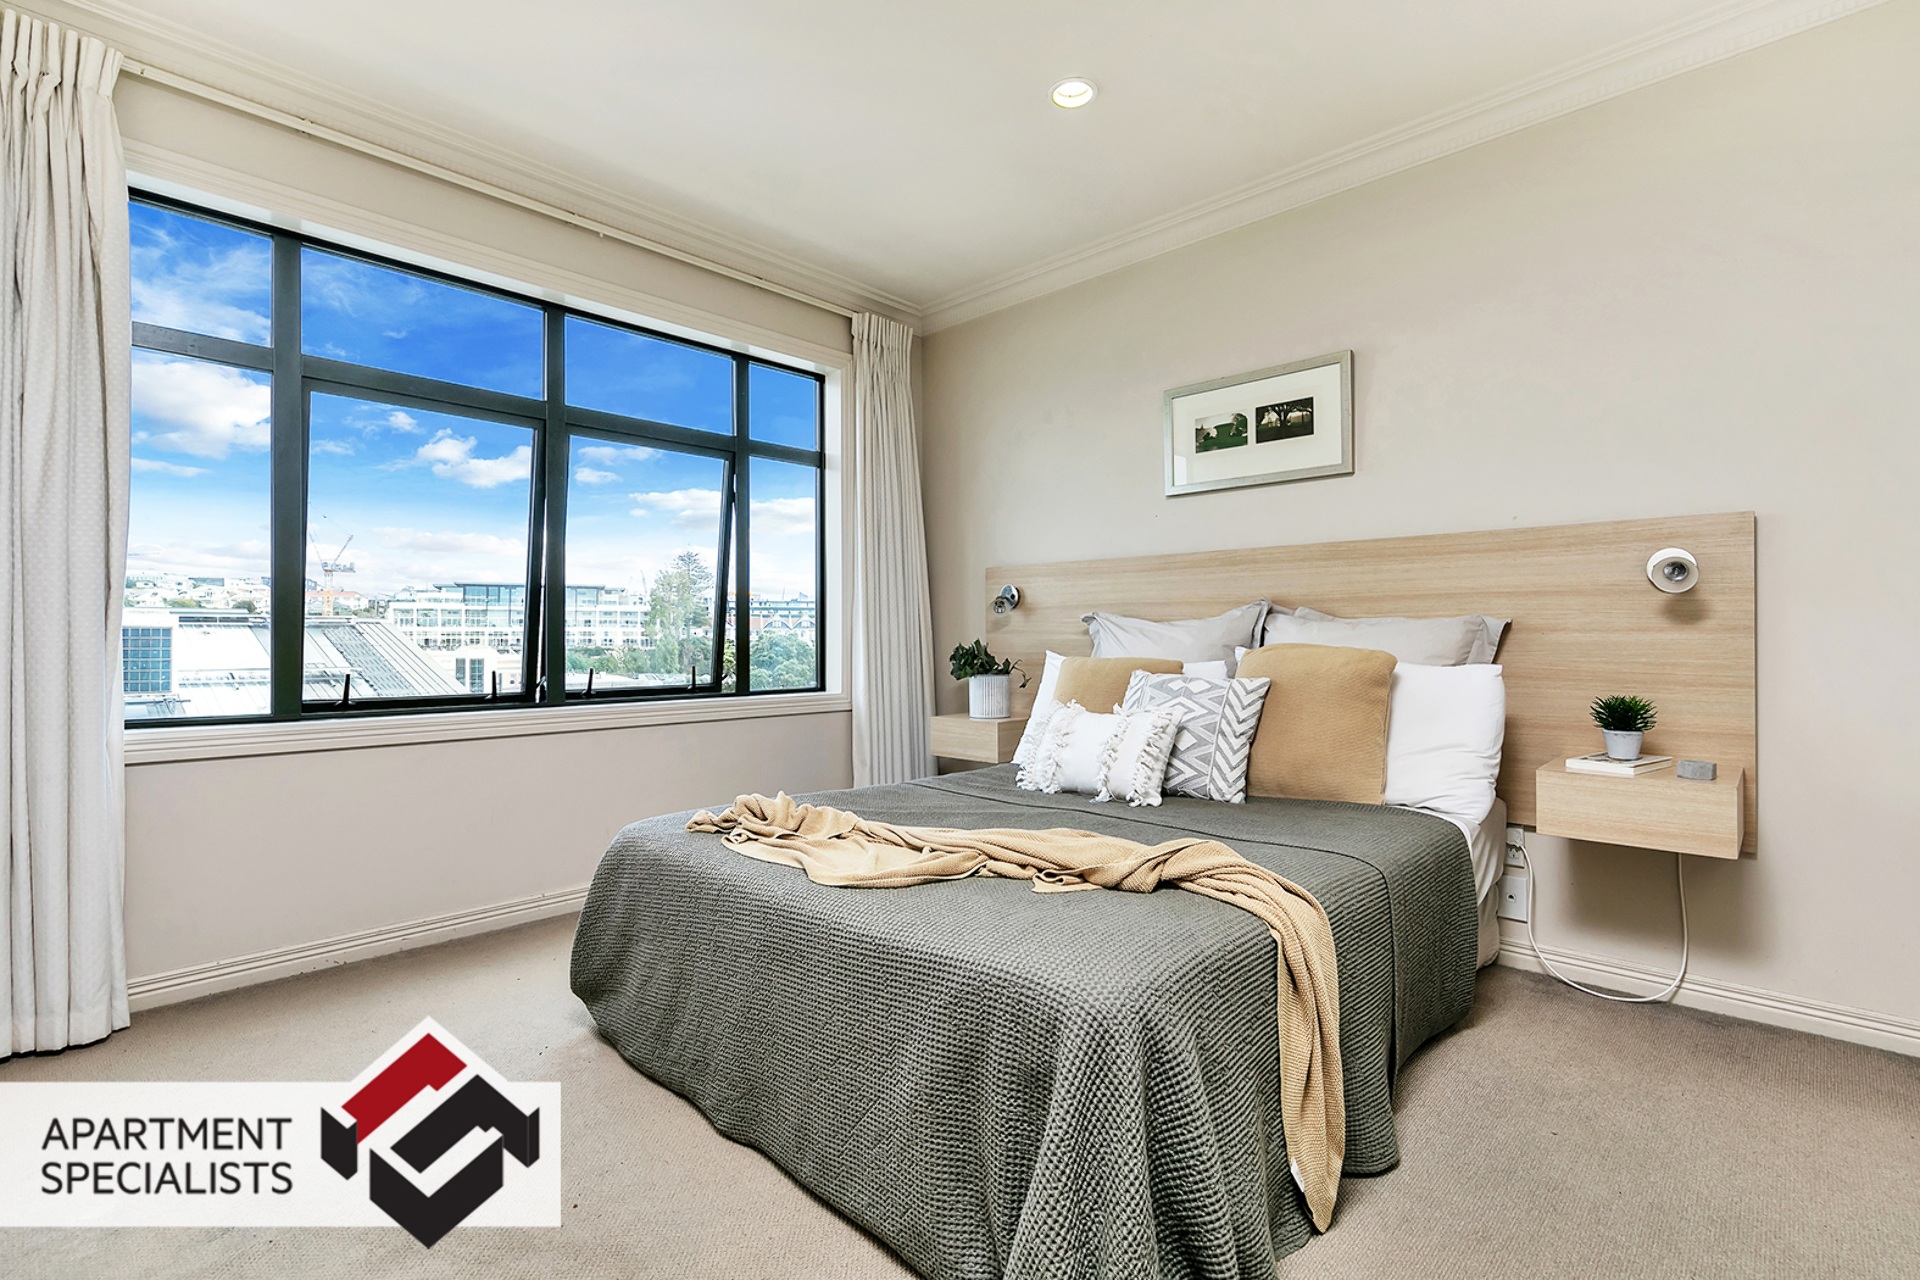 0 | 118 Gladstone Road, Parnell | Apartment Specialists